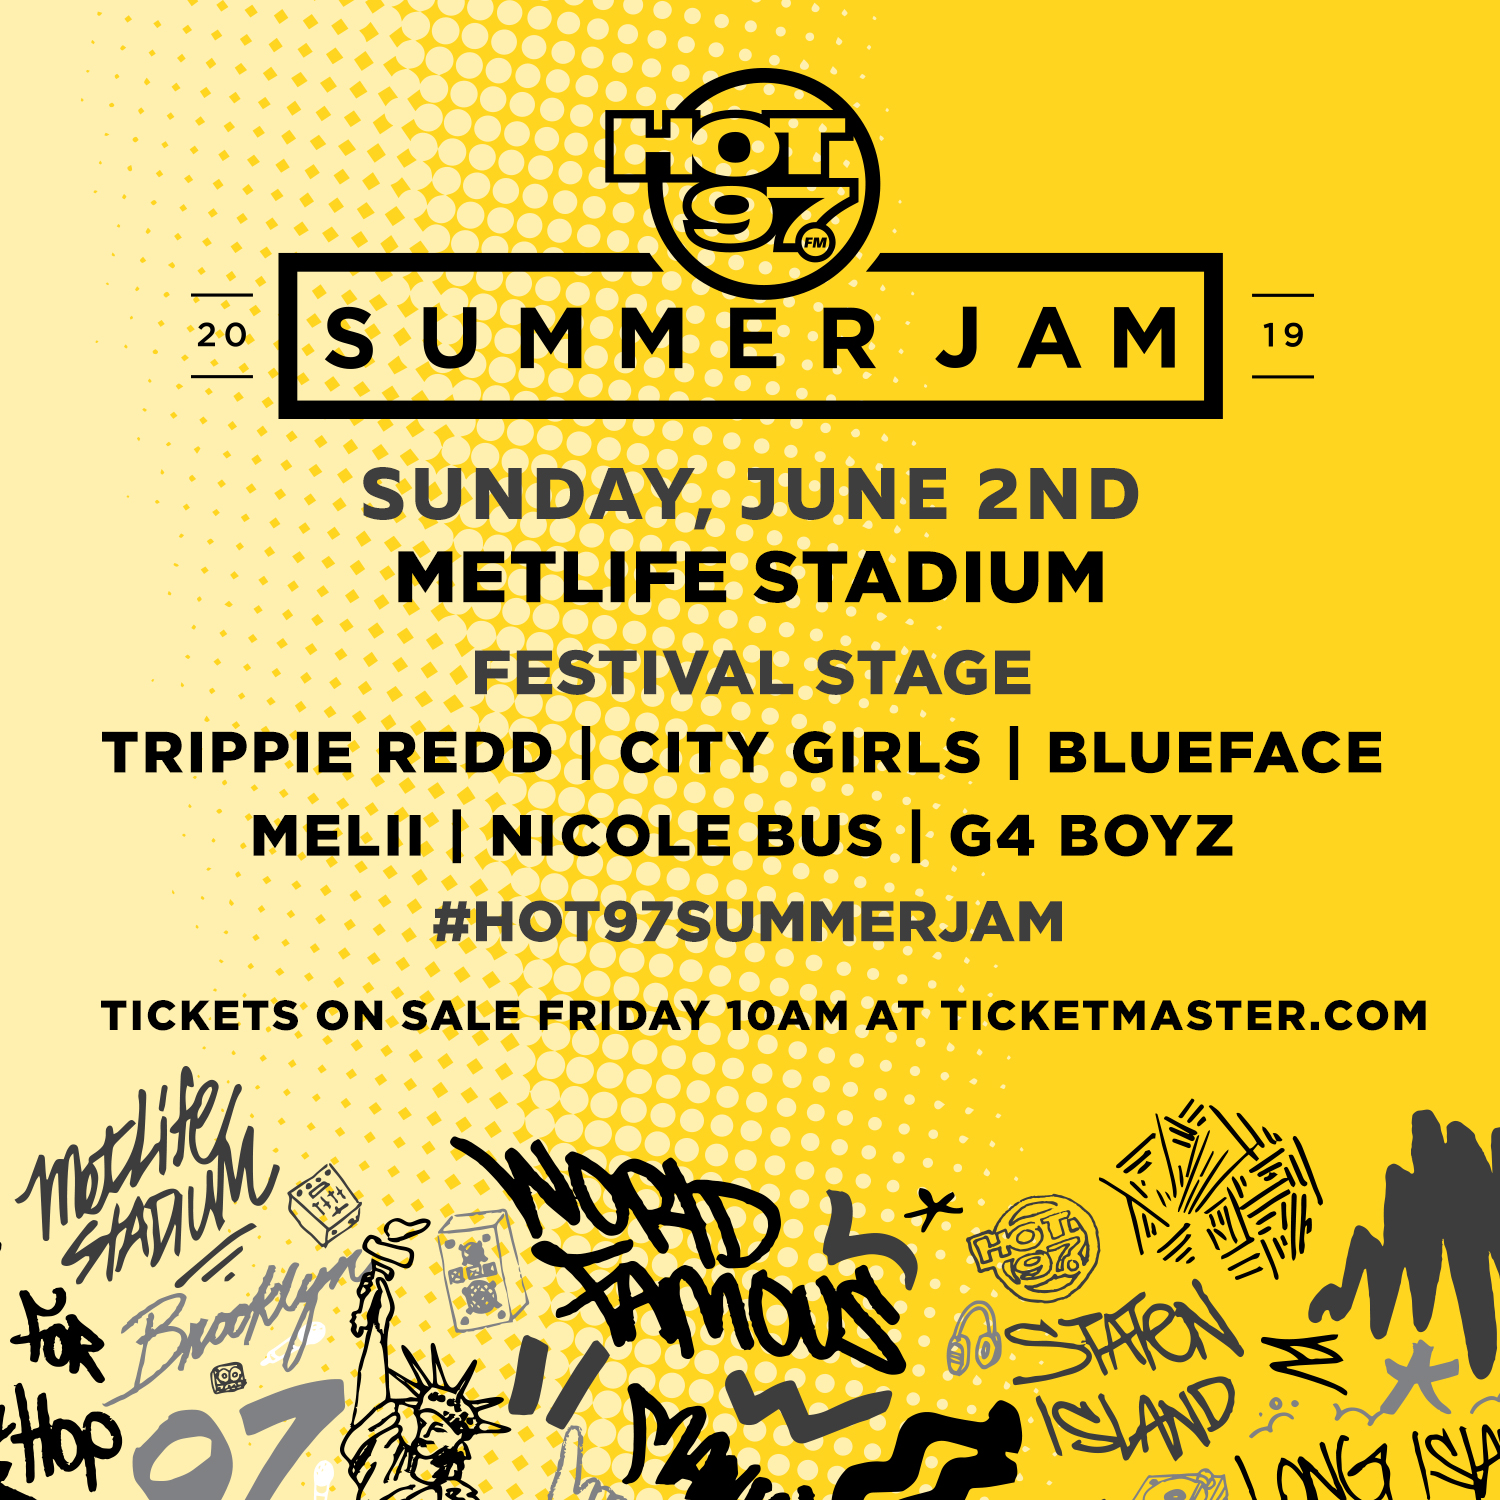 Cardi B, Blueface, and Megan Thee Stallion Will Play Hot 97 Summer Jam